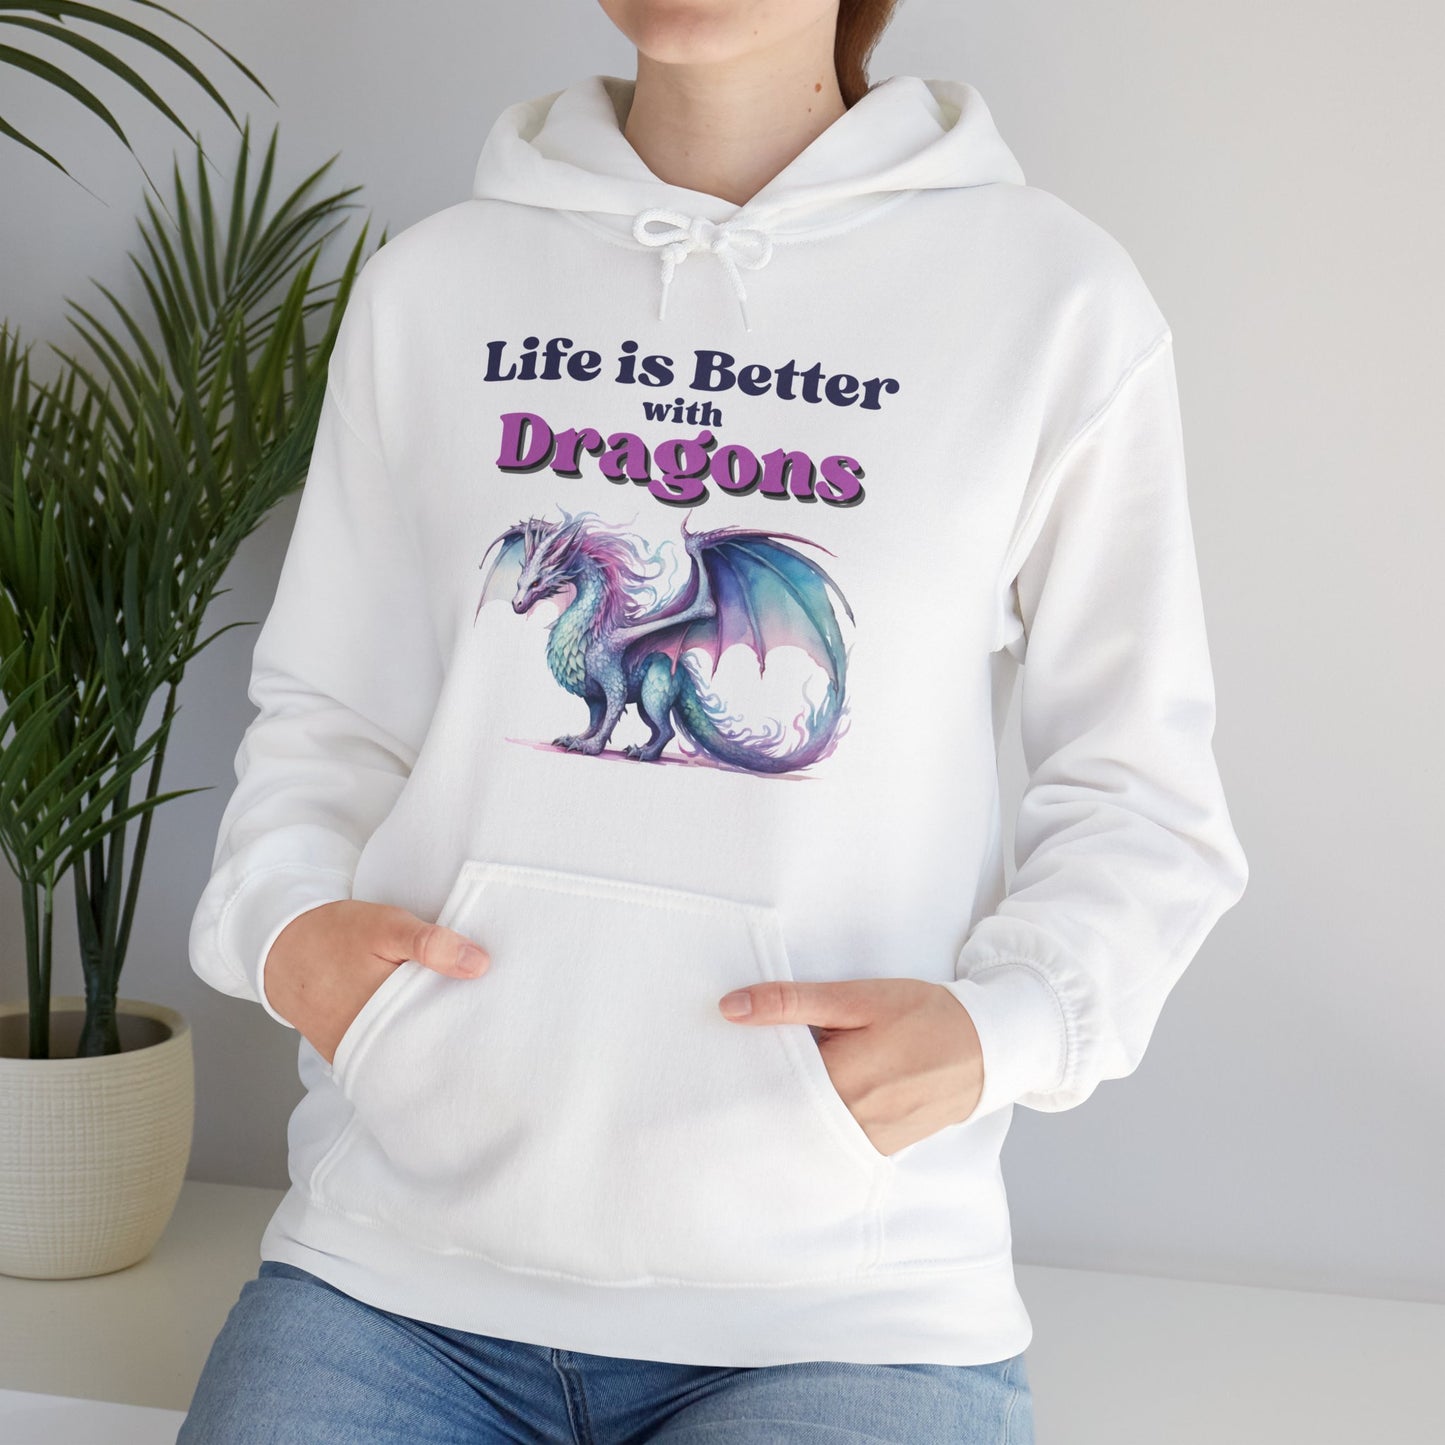 Life is Better with Dragons, Unisex Heavy Blend™ Hooded Sweatshirt